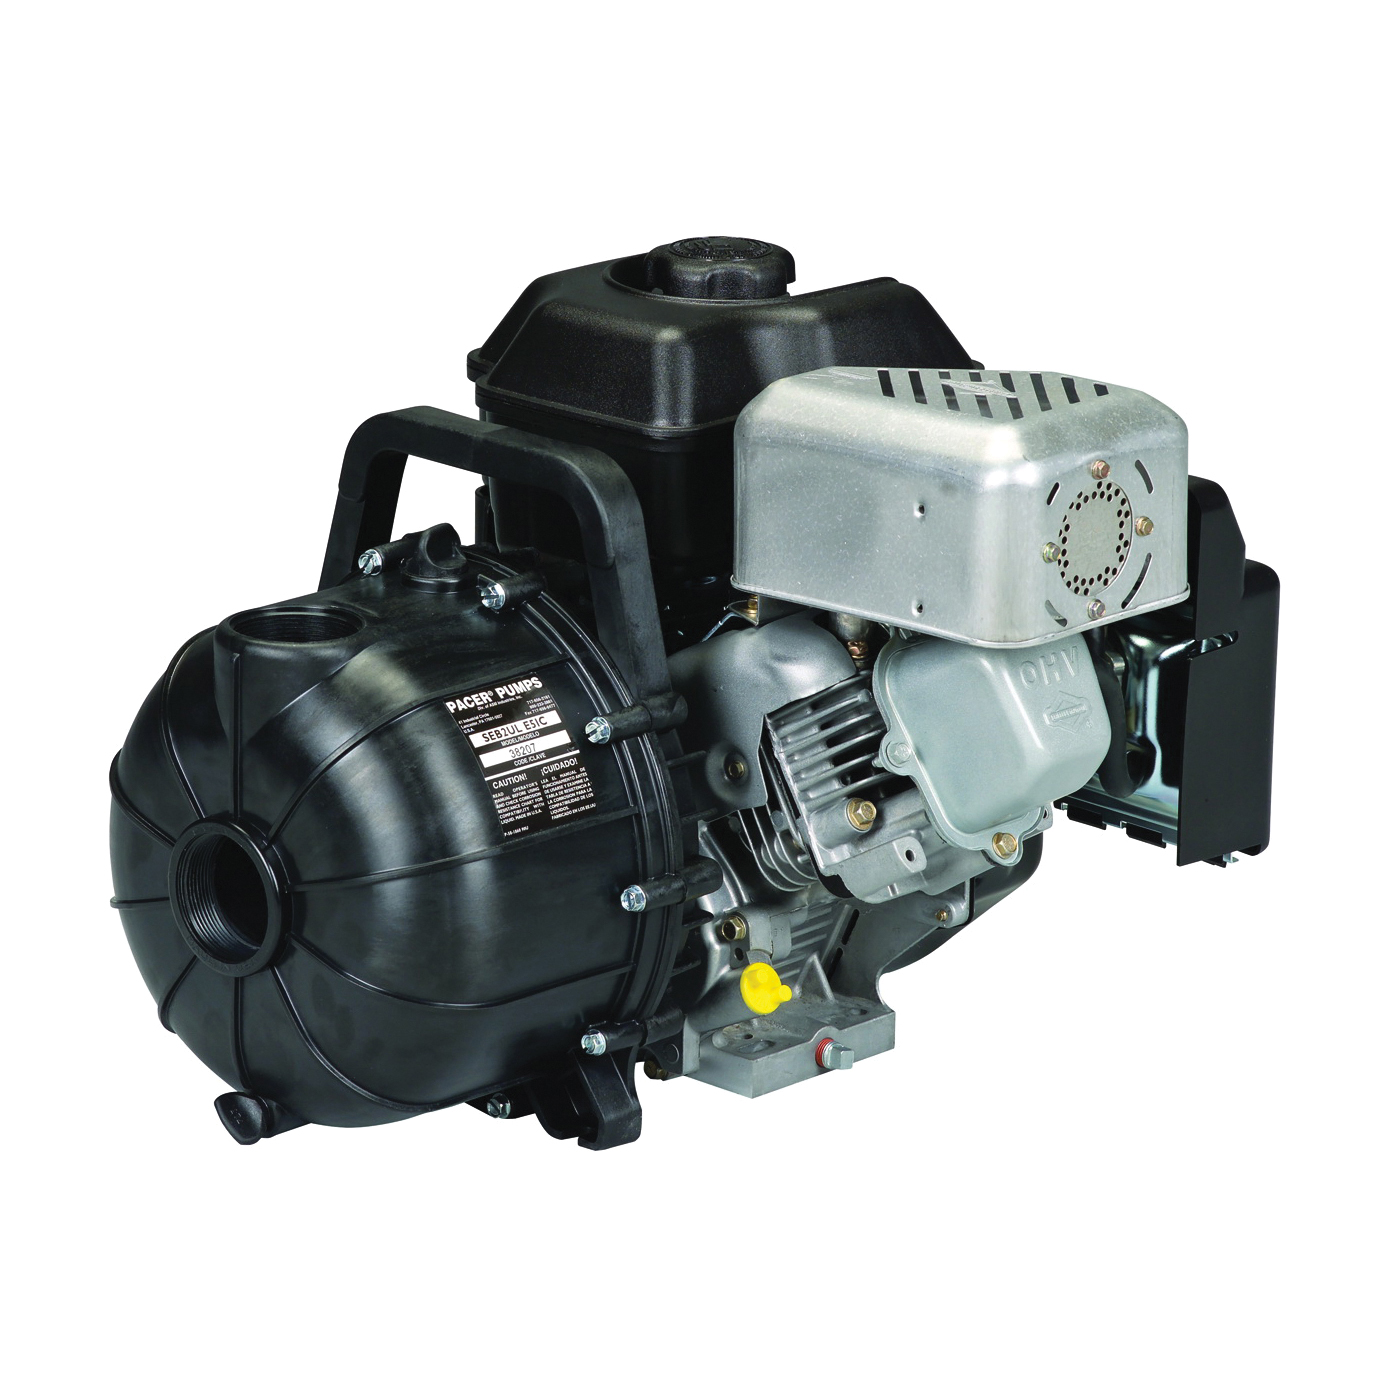 S Series SE2ULE950 Self-Priming Centrifugal Pump, 5.5 hp, 2 in Outlet, 130 ft Max Head, 190 gpm